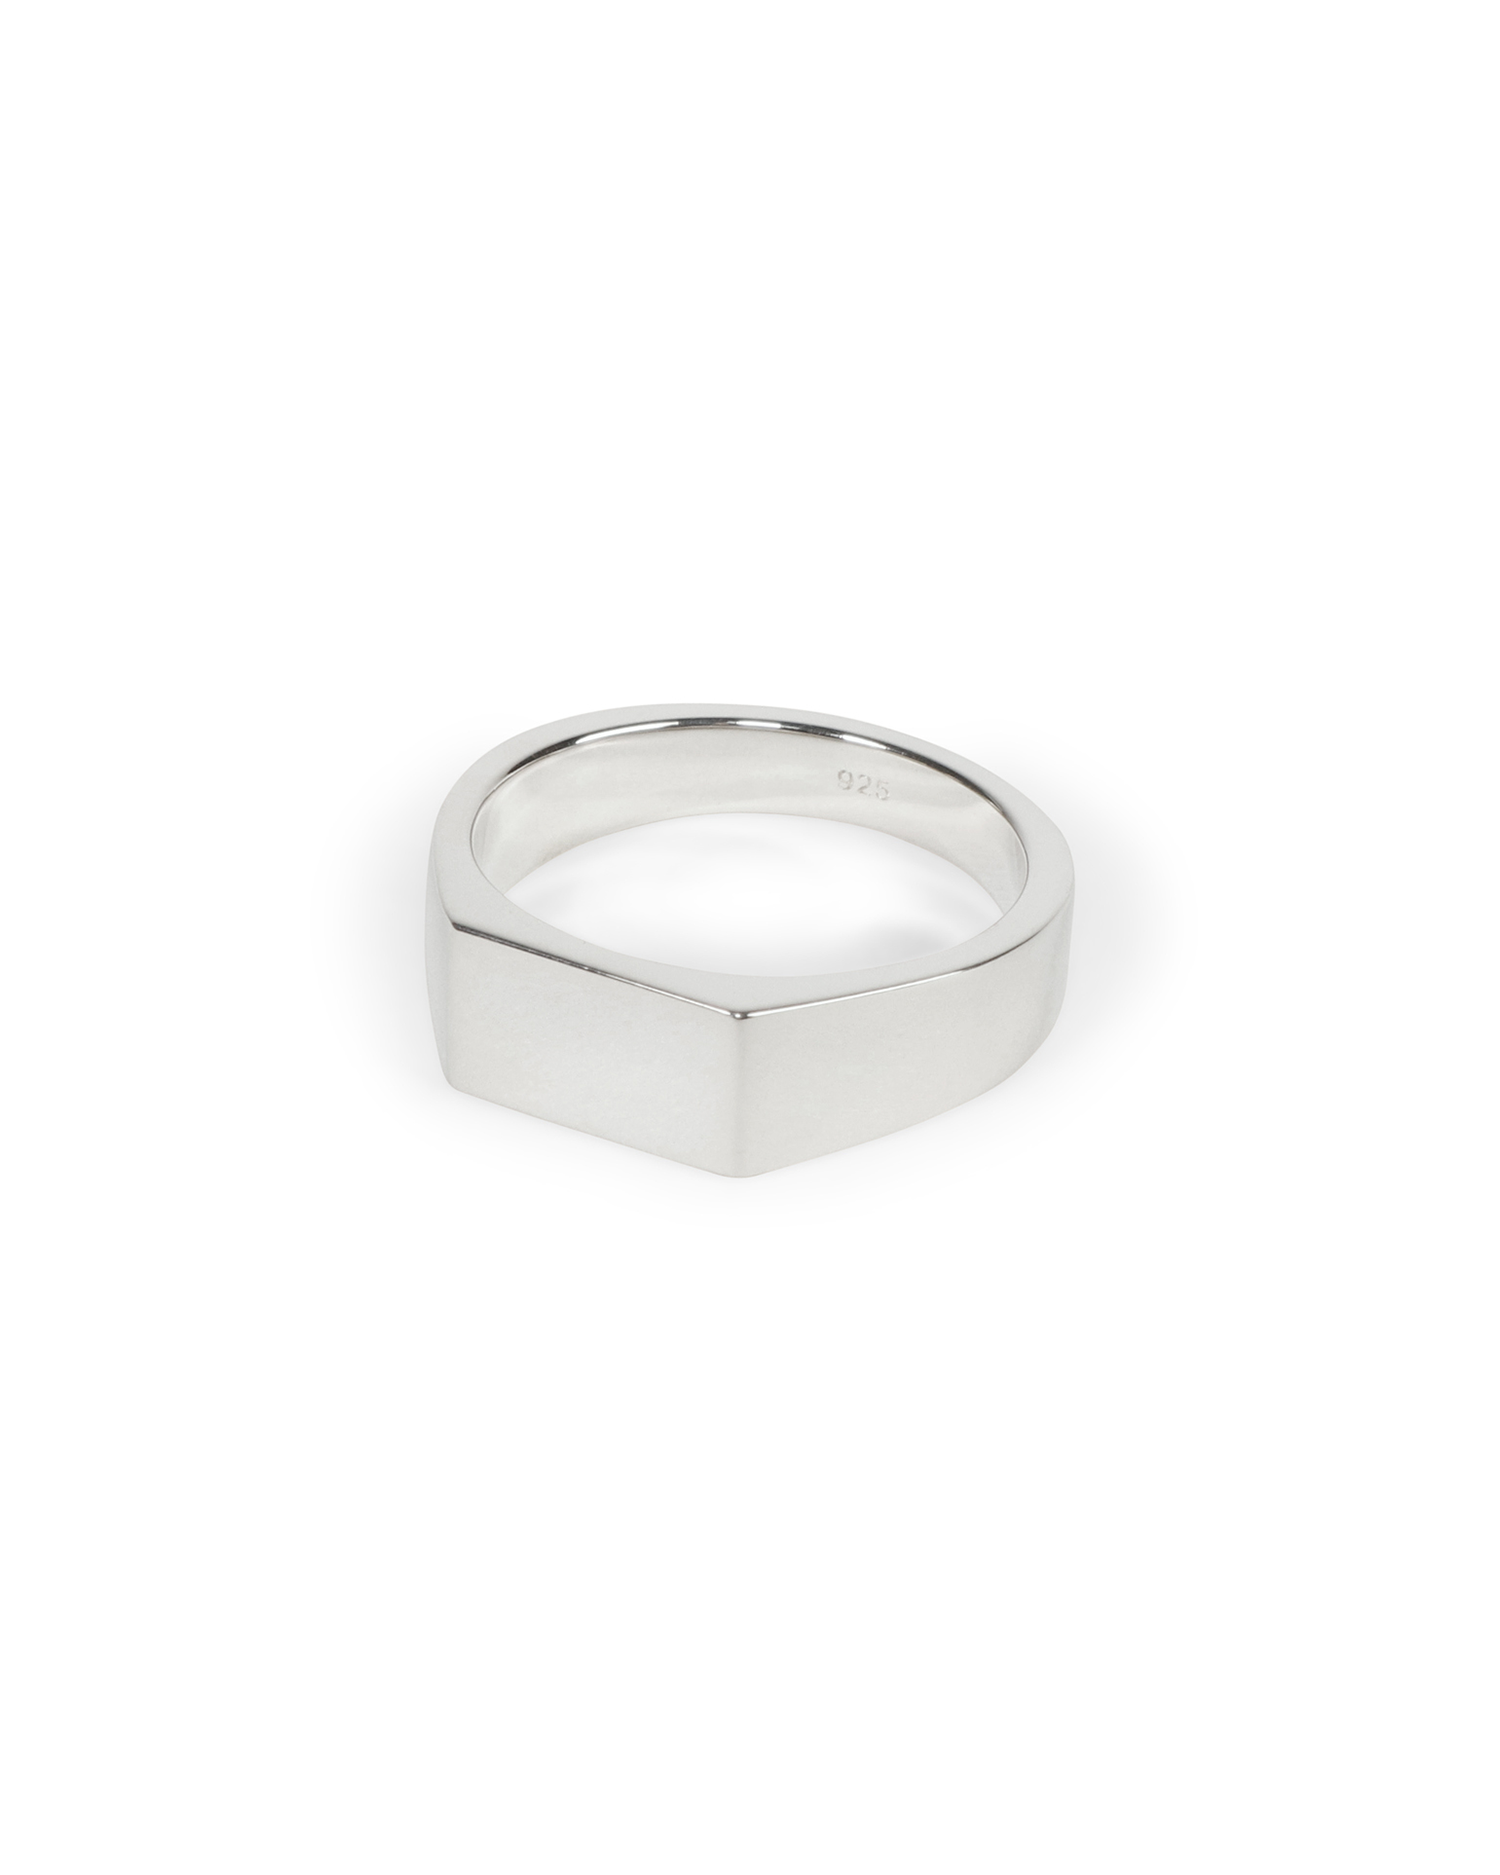 TYPE 003 Rectangle Signet Ring - 925 Sterling Silver